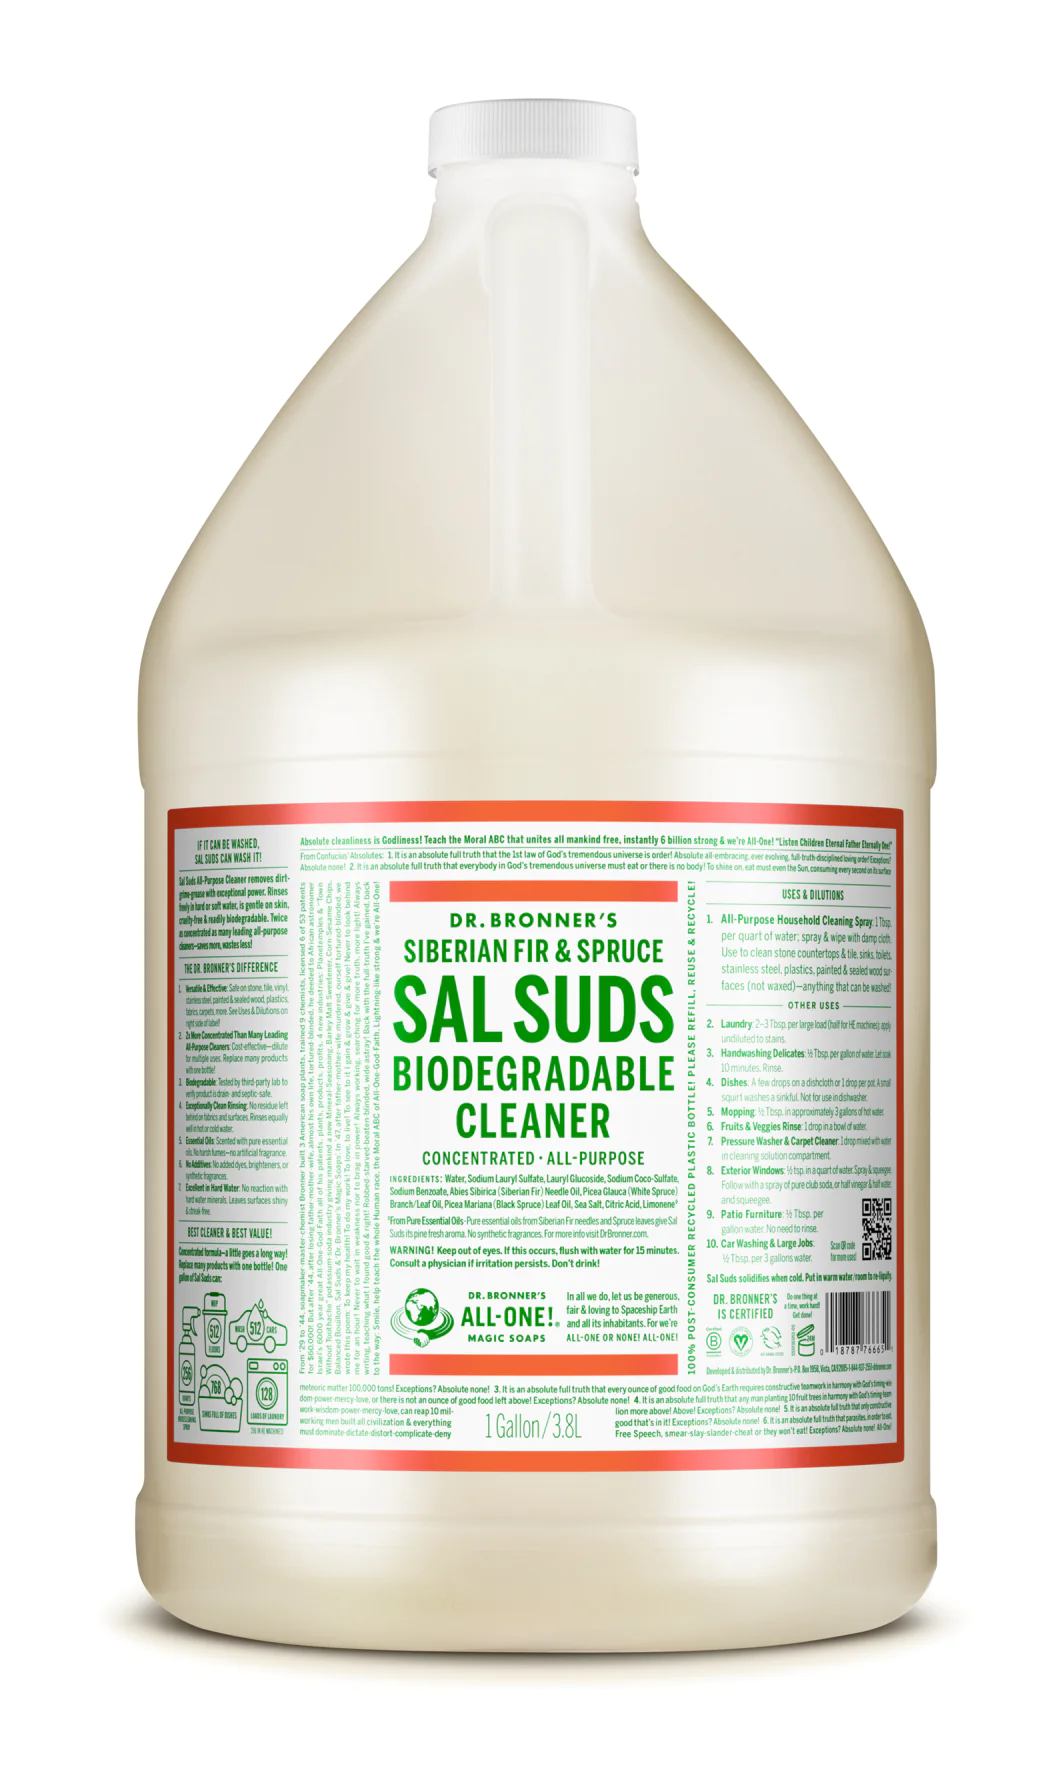 SAL SUDS BIODEGRADABLE CLEANER Dishes-floor-laundry-more—the ultimate multi-purpose household cleaner!